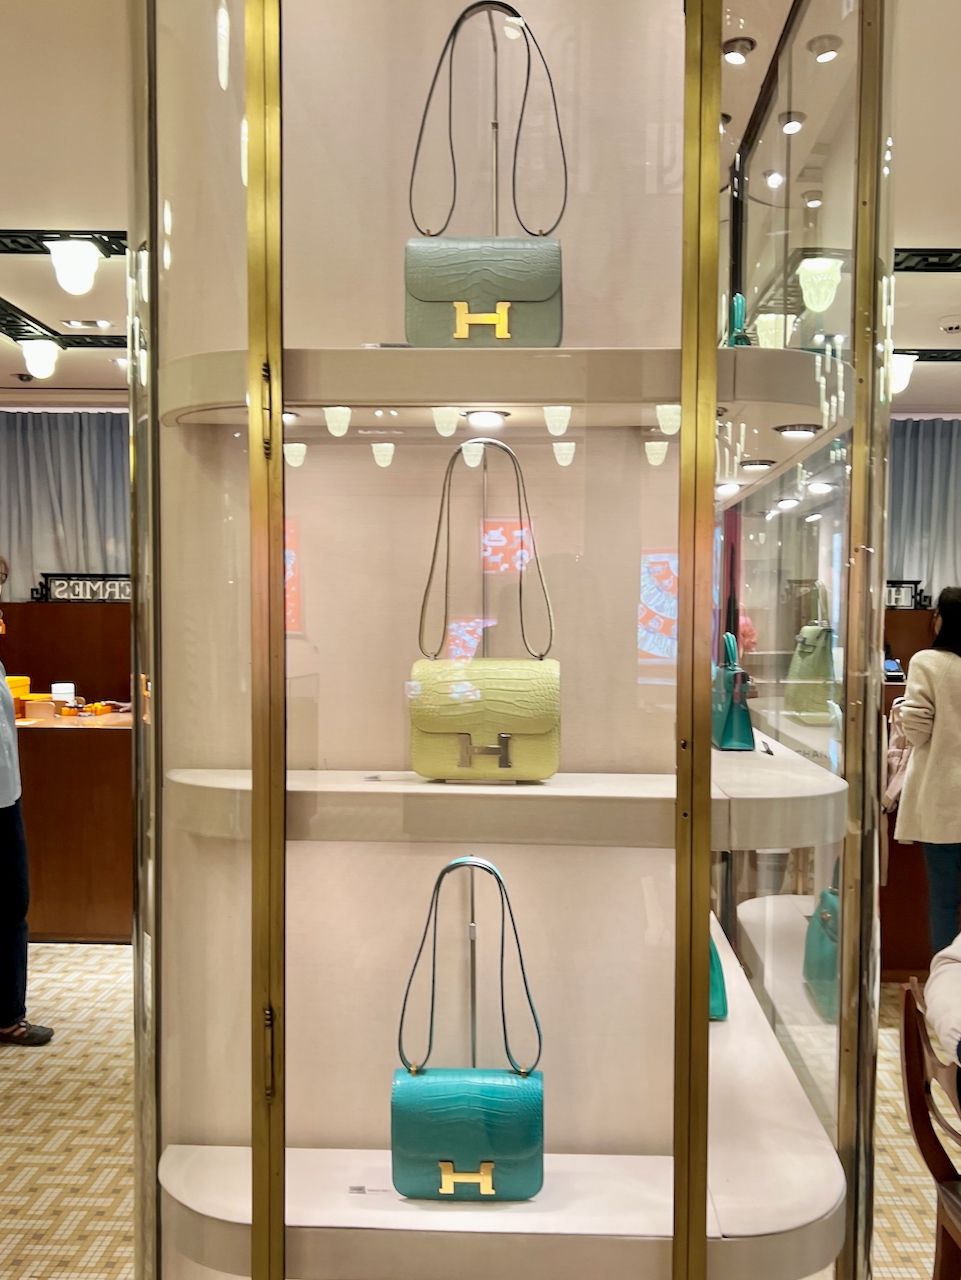 A Guide to Buying Your First Exotic Hermès Bag